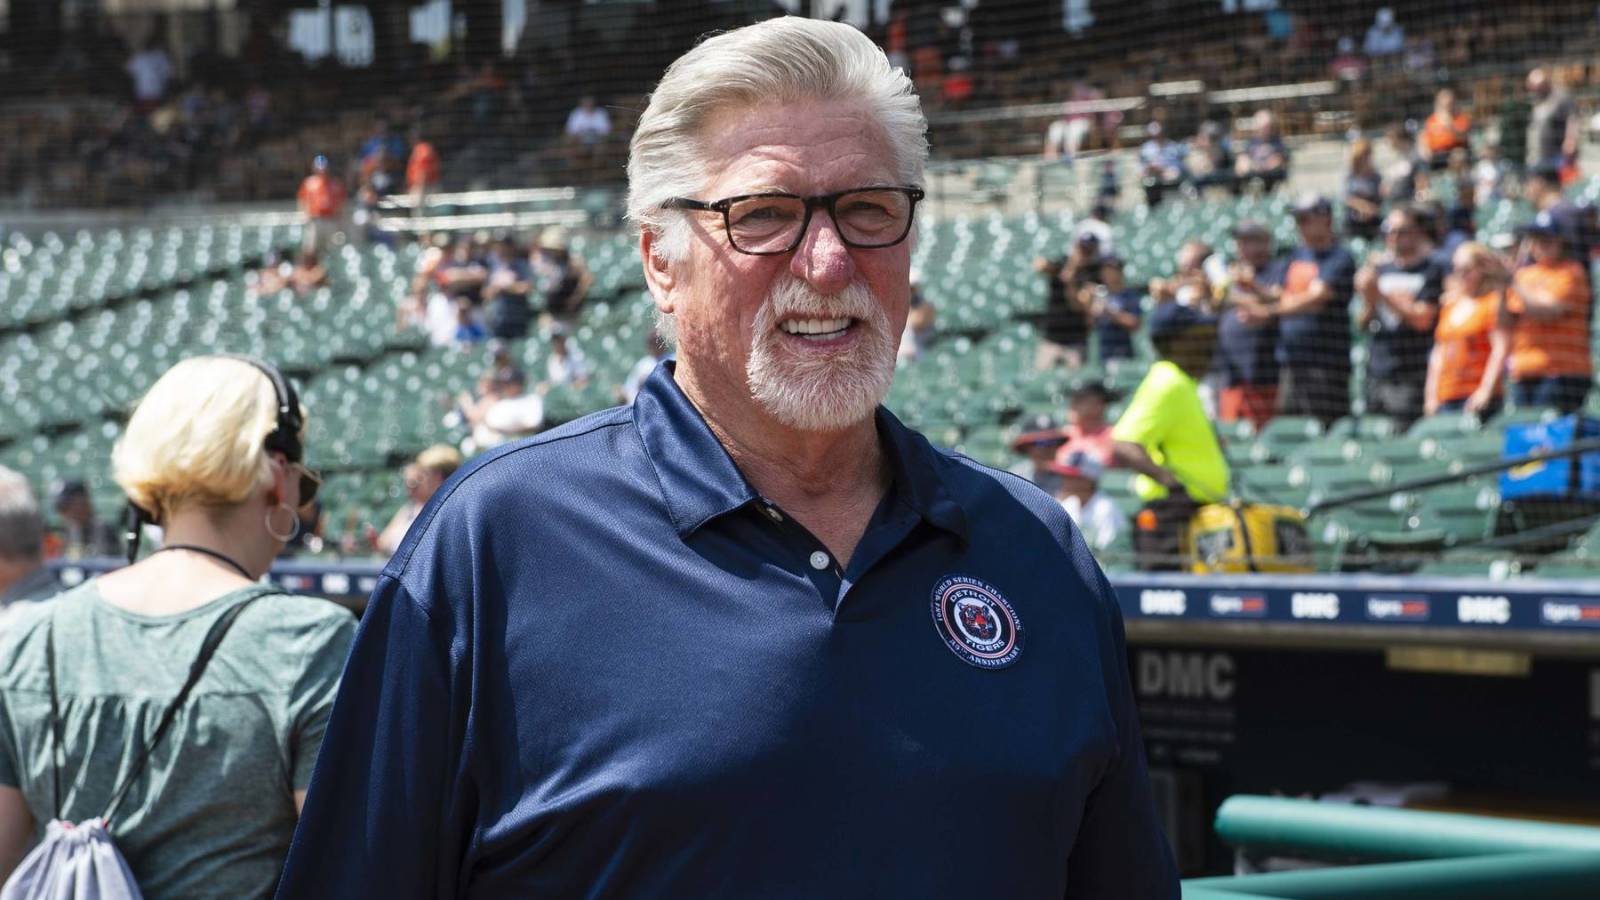 Tigers broadcaster Jack Morris suspended indefinitely after offensive remarks about Shohei Ohtani